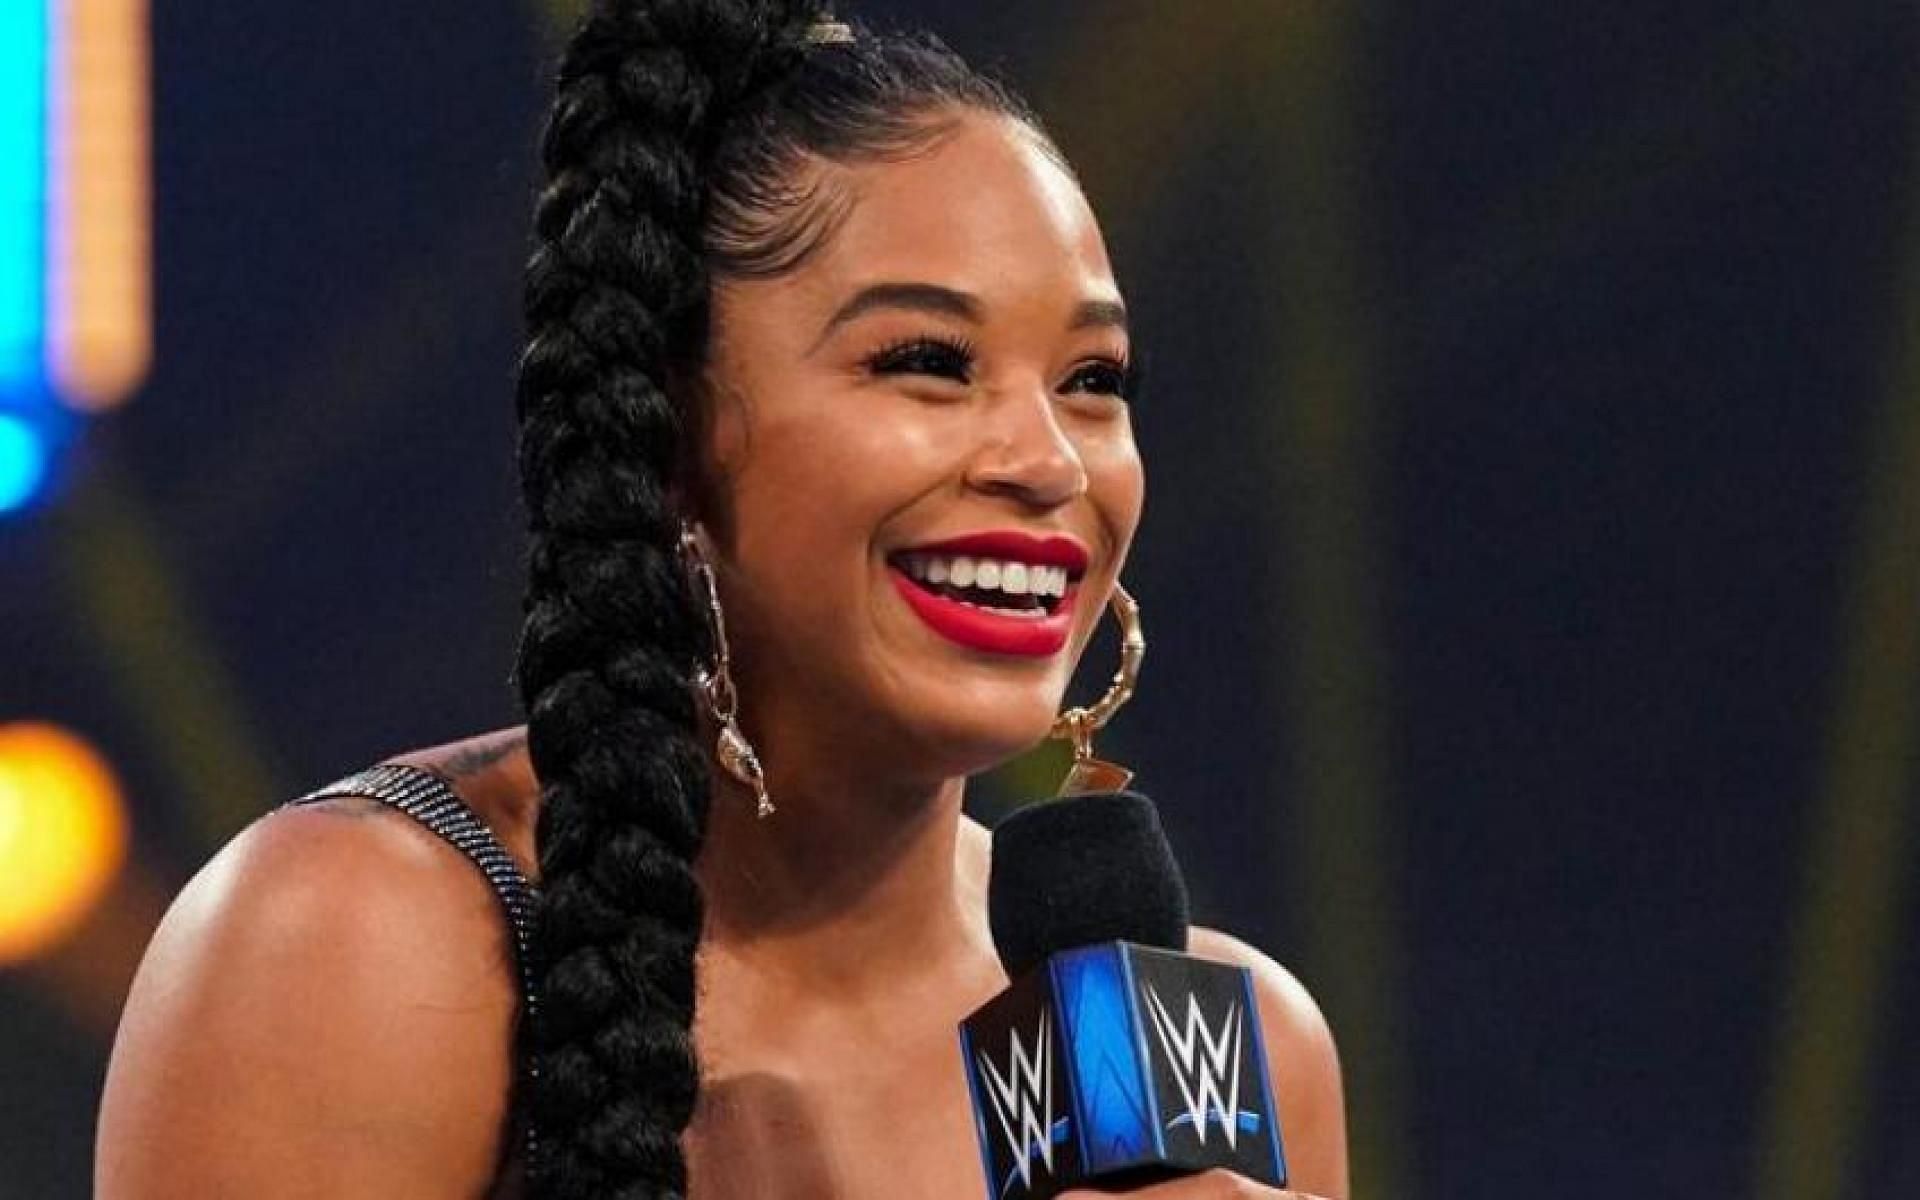 Bianca Belair will participate in the upcoming Elimination Chamber match